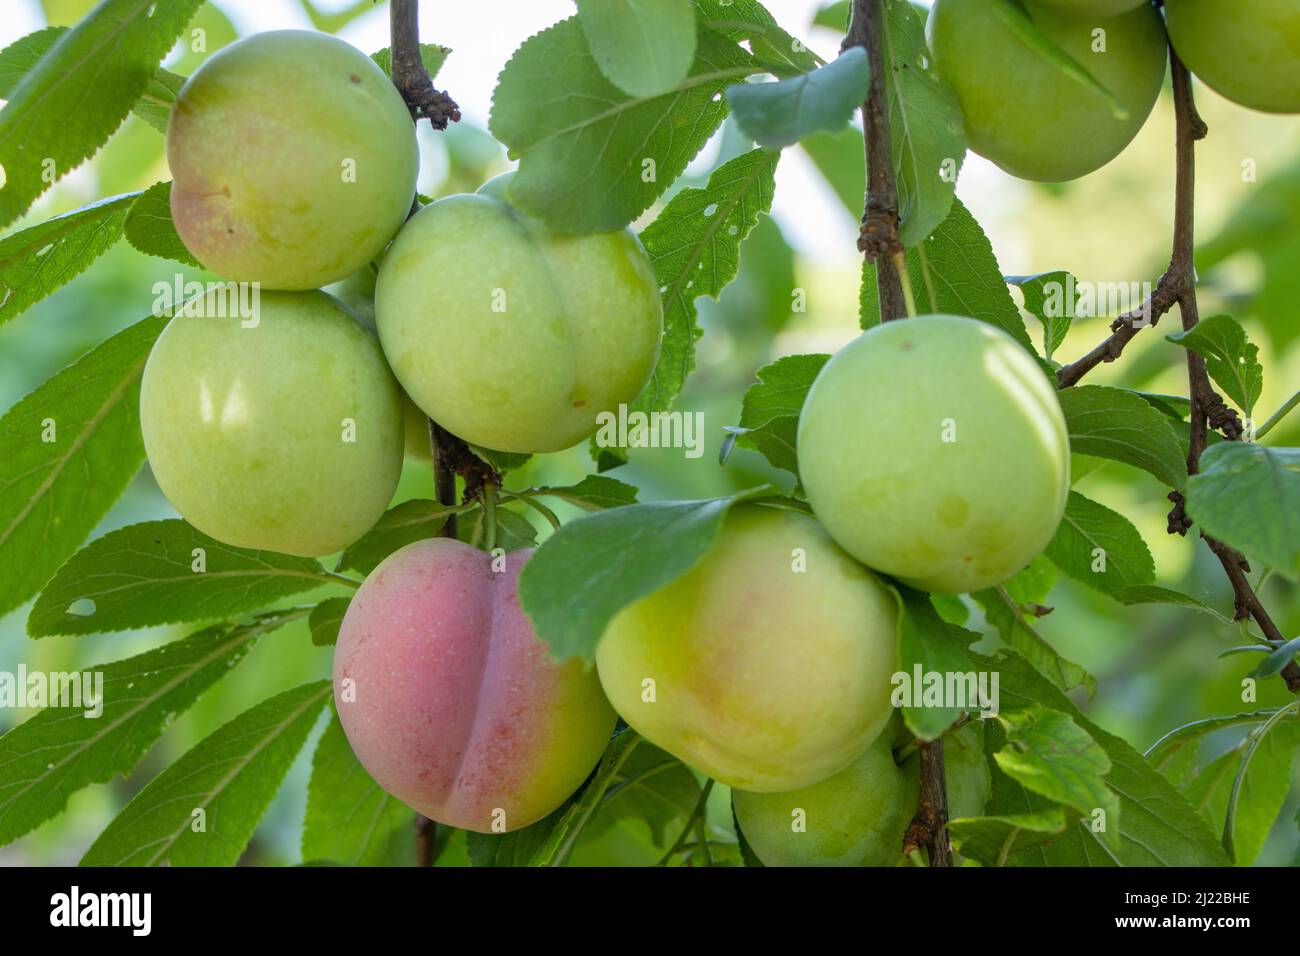 Plum tree with juicy fruits. Ripening plums, Stock Photo